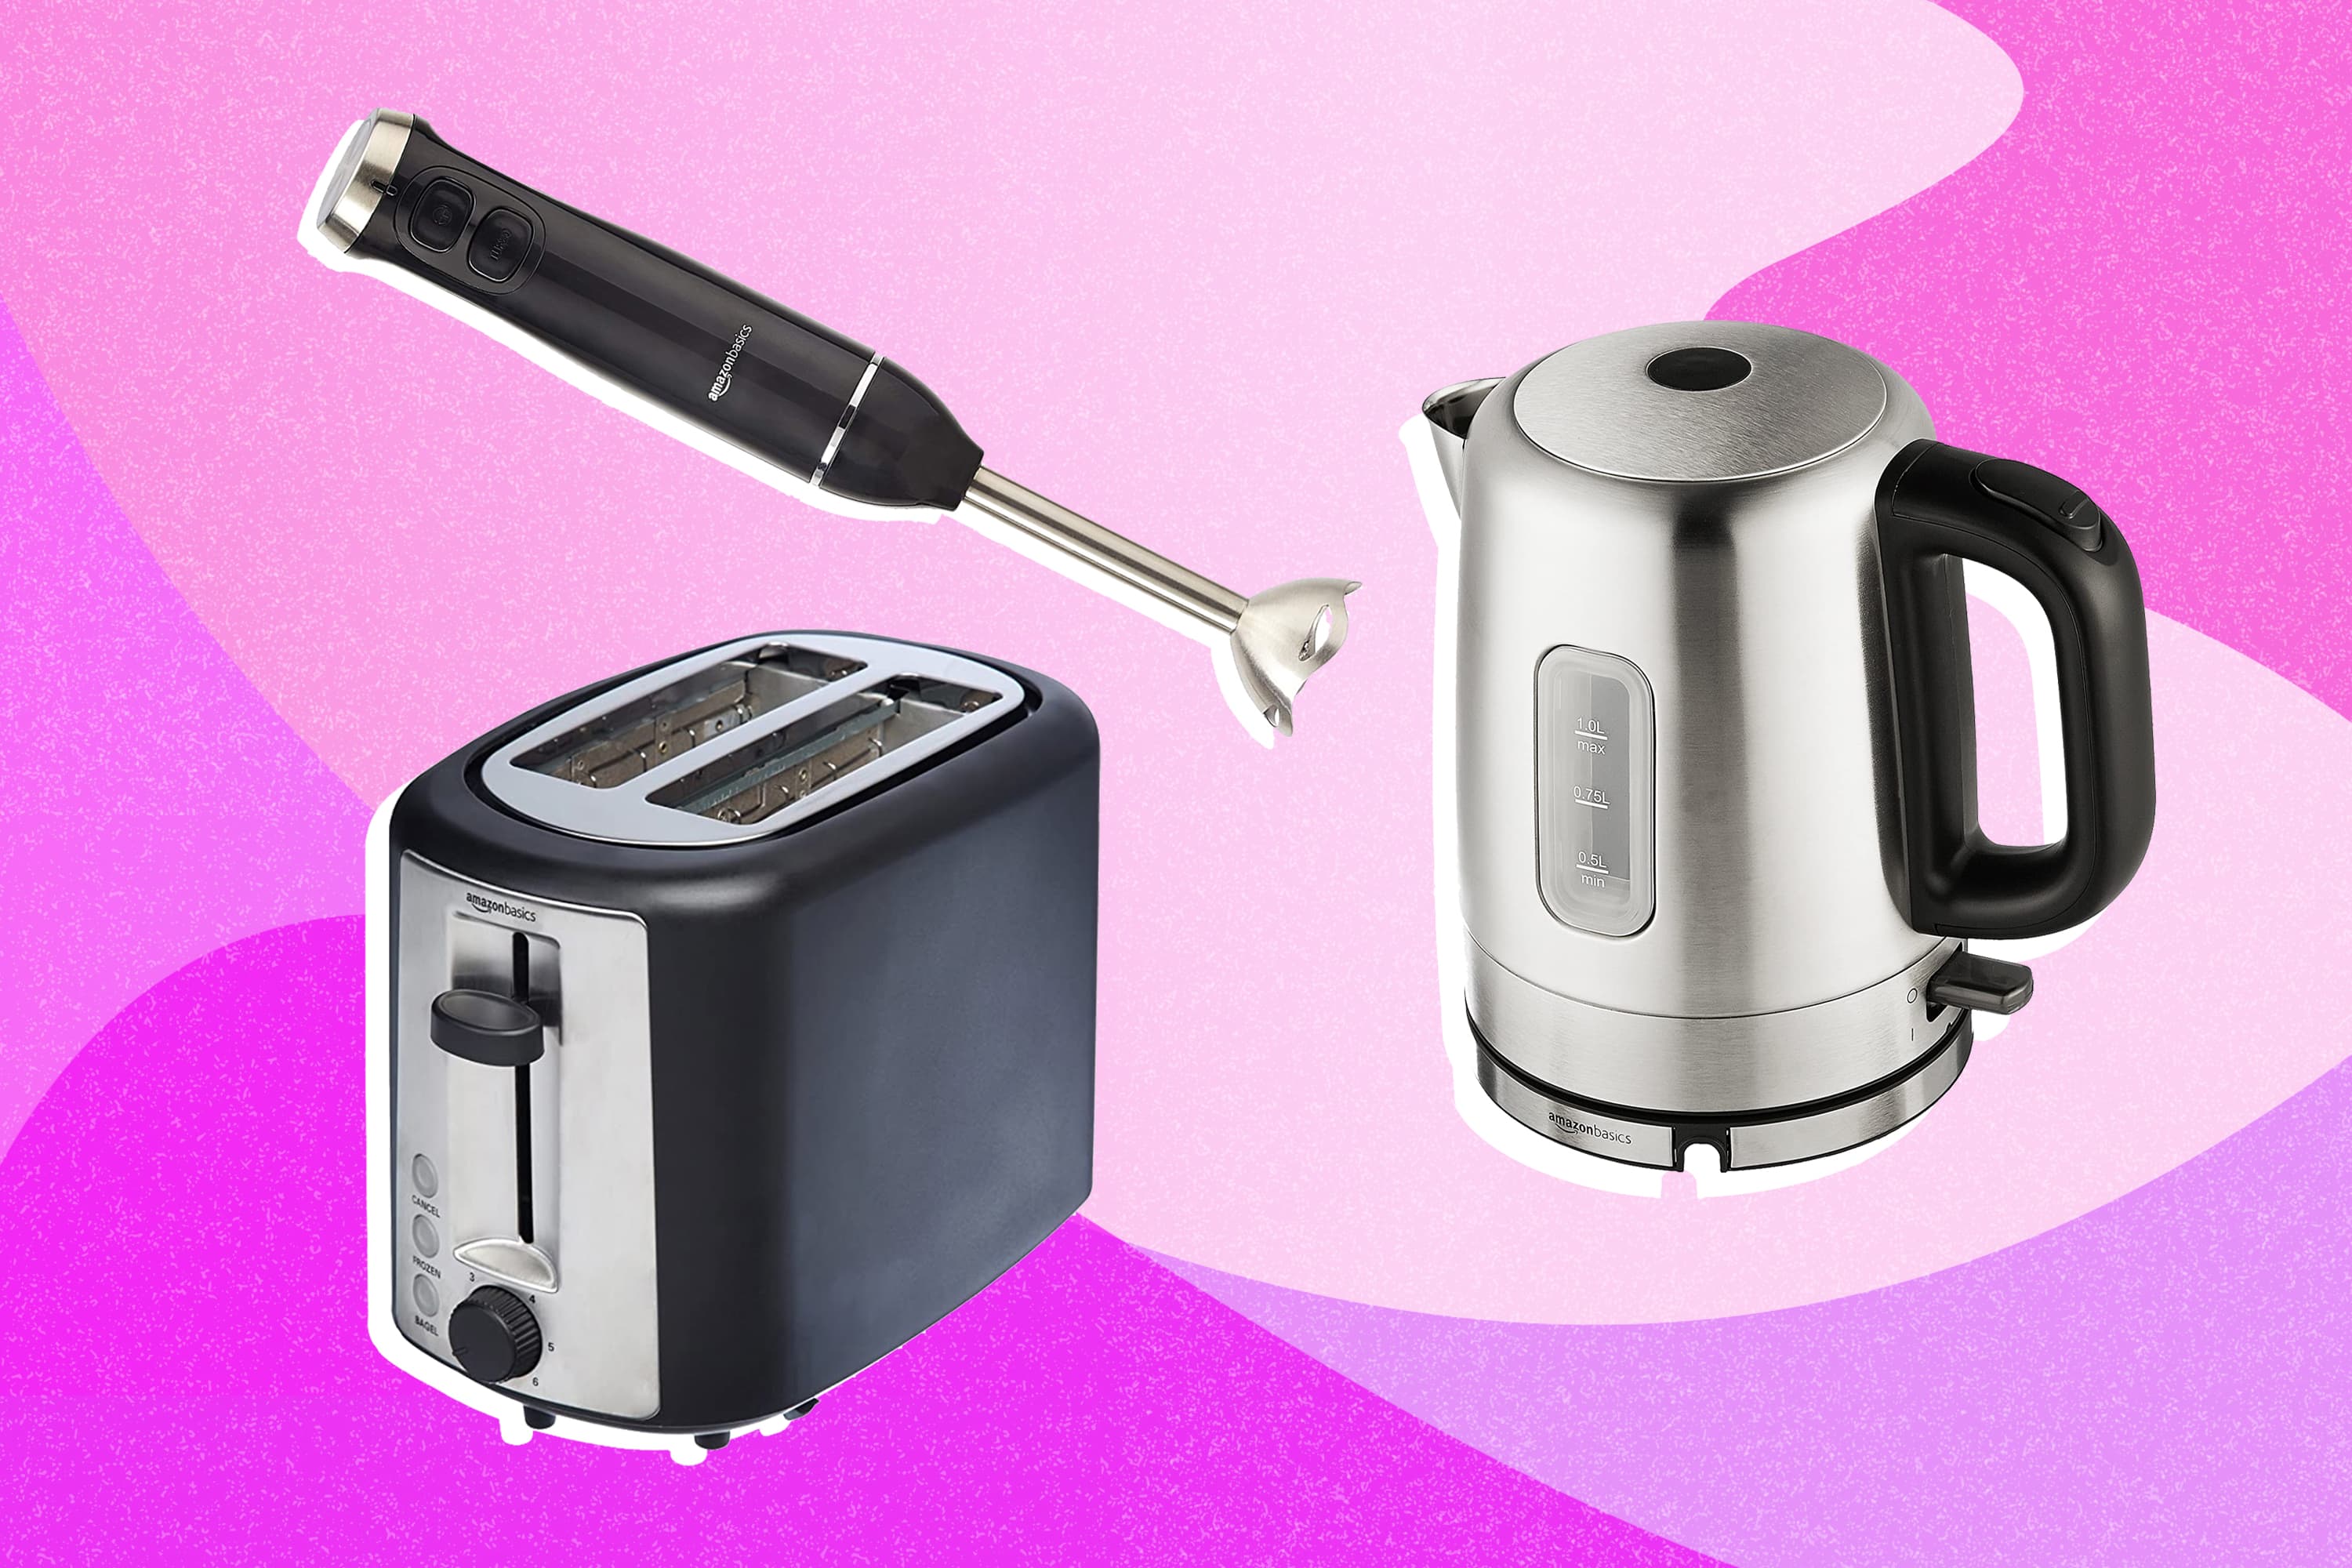 SMEG toaster and kettle review: are these gorgeous appliances